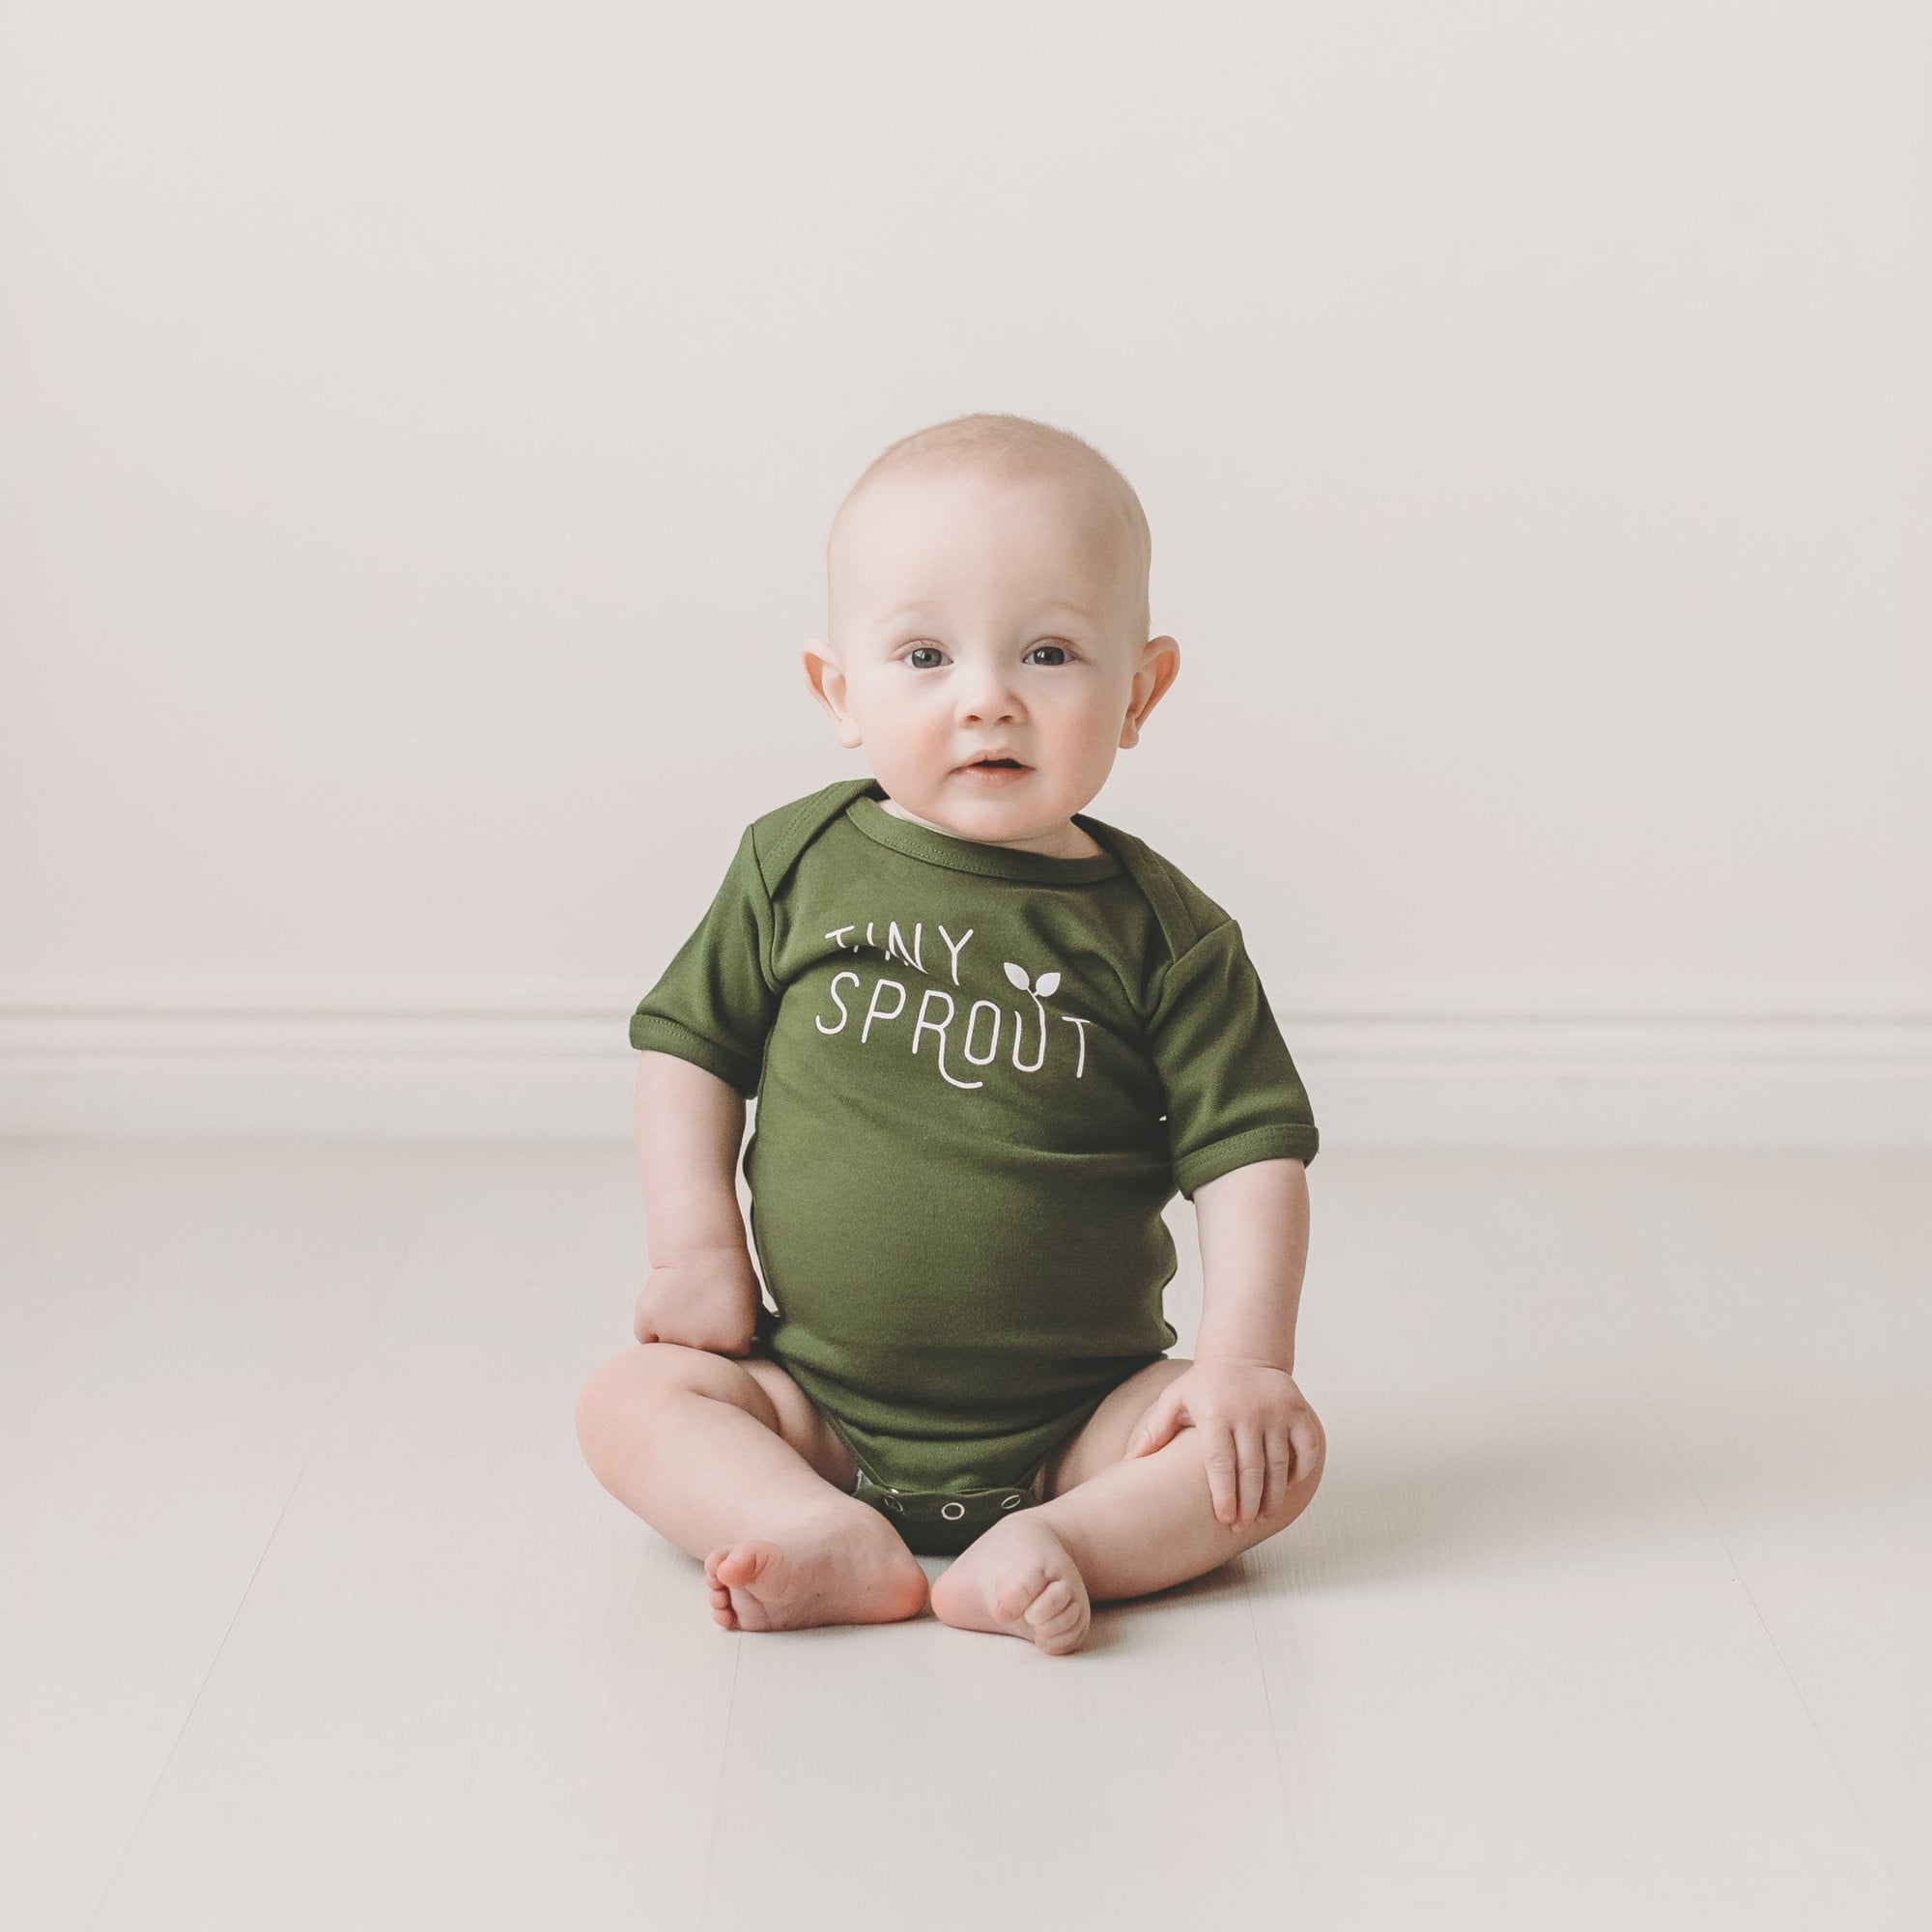 PRE-ORDER - Tiny Sprout baby bodysuit / onesie - Hilland sonconstruction.